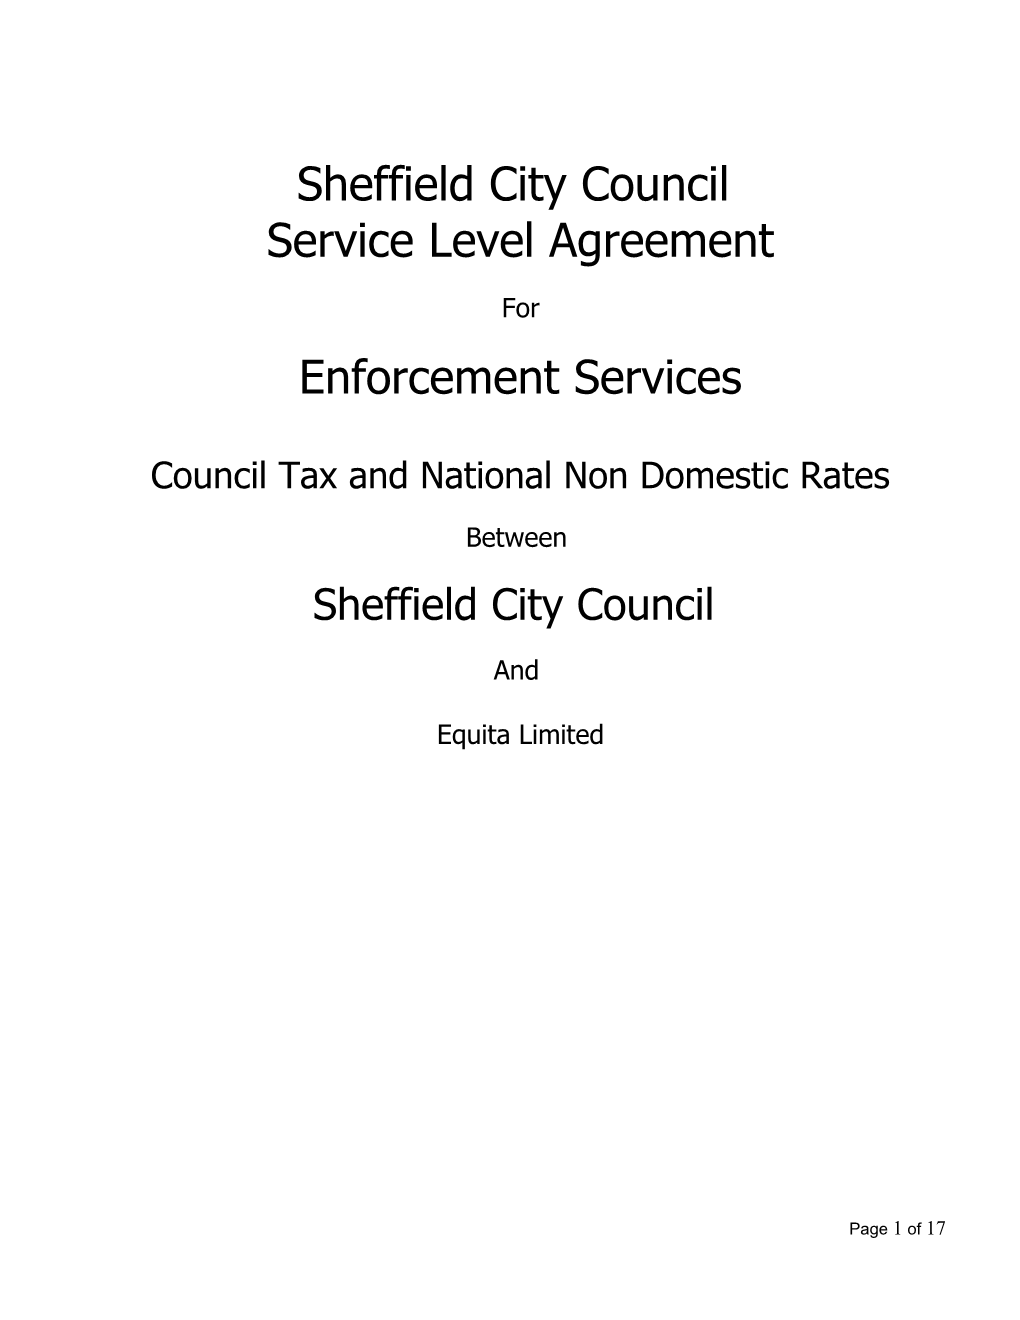 Council Tax and National Non Domestic Rates